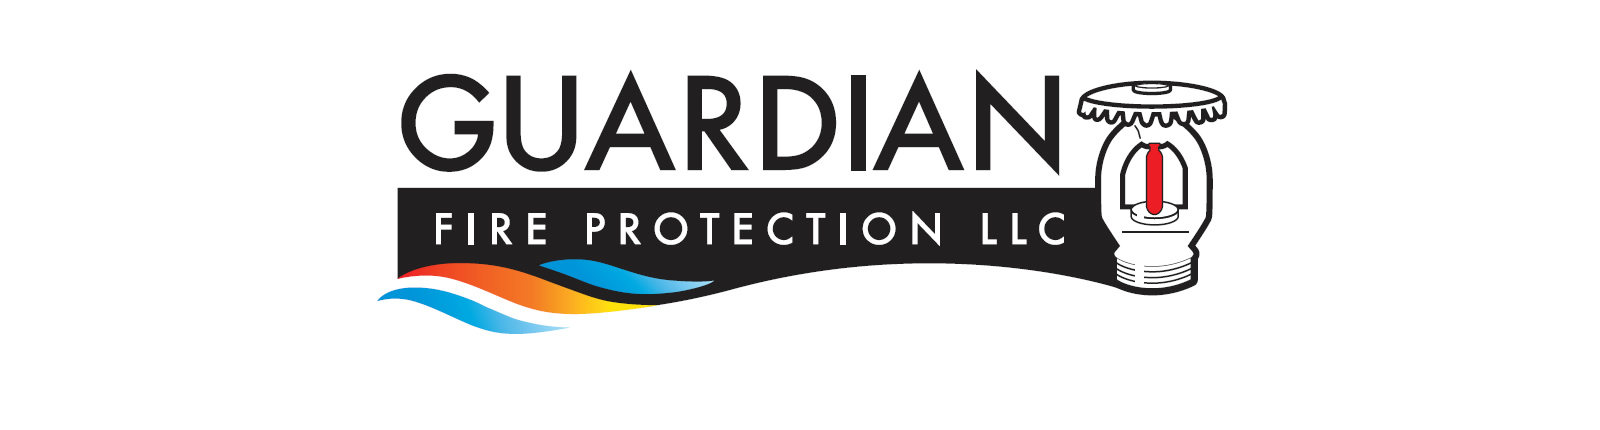 Guardian Fire Protection